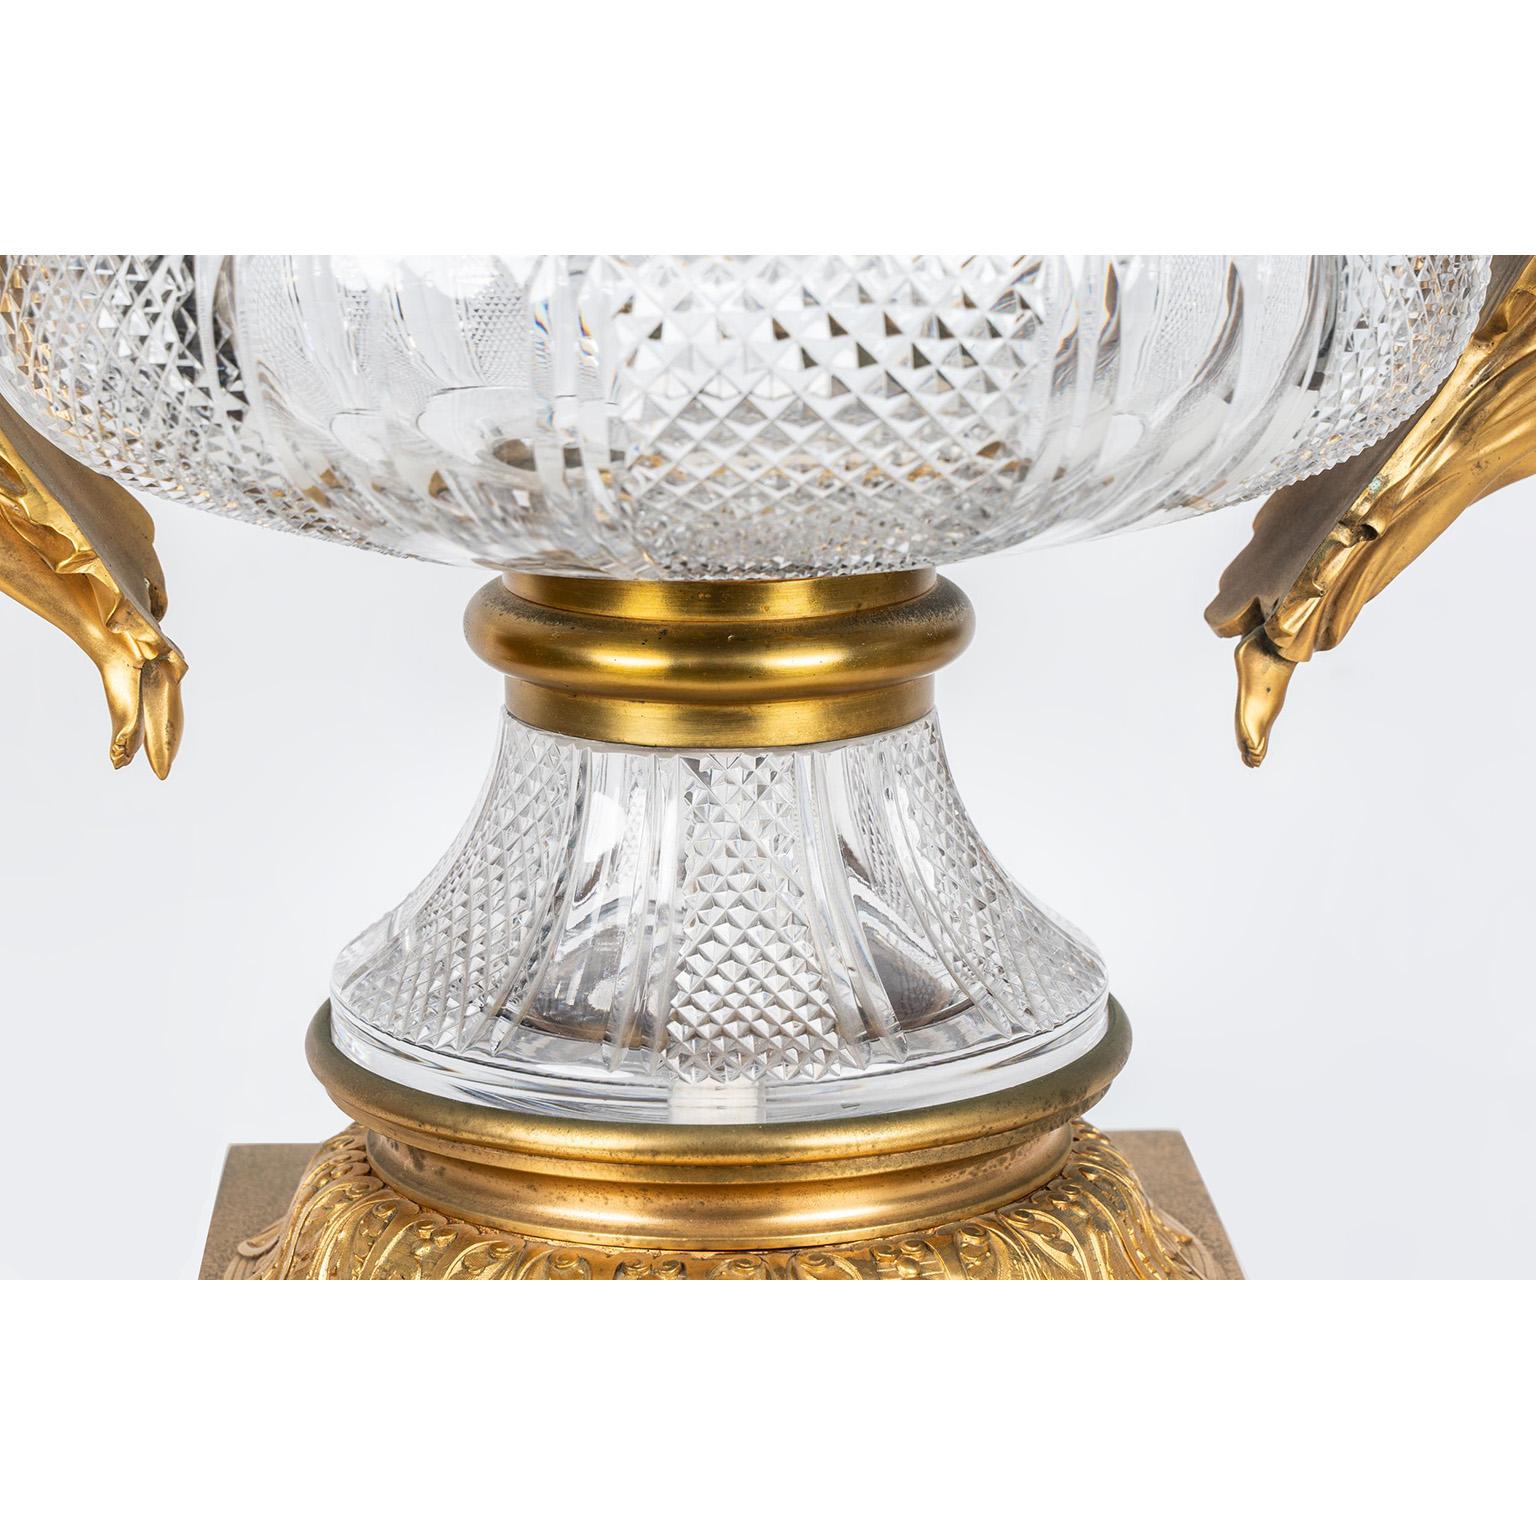 Large Empire Style Gilt-Bronze and Cut-Glass 'Grande Coupe' Urn Centerpiece In Good Condition For Sale In Los Angeles, CA